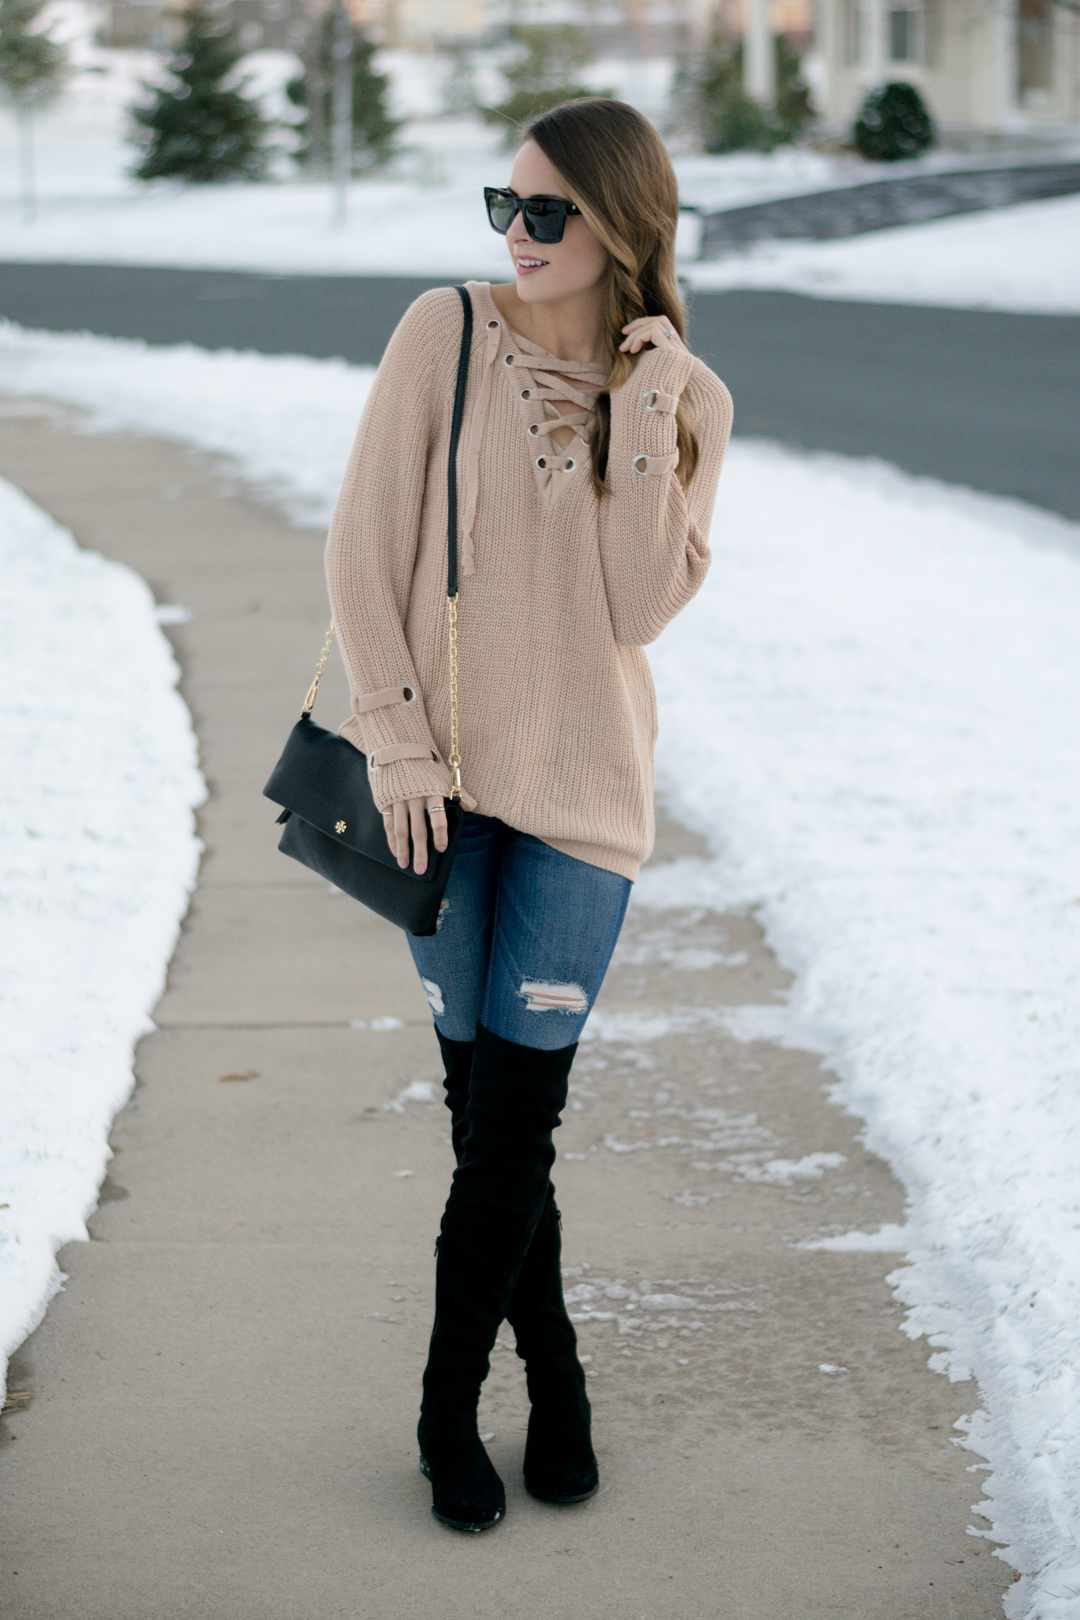 Lace-up Knit Sweater + OTK Boots - The 